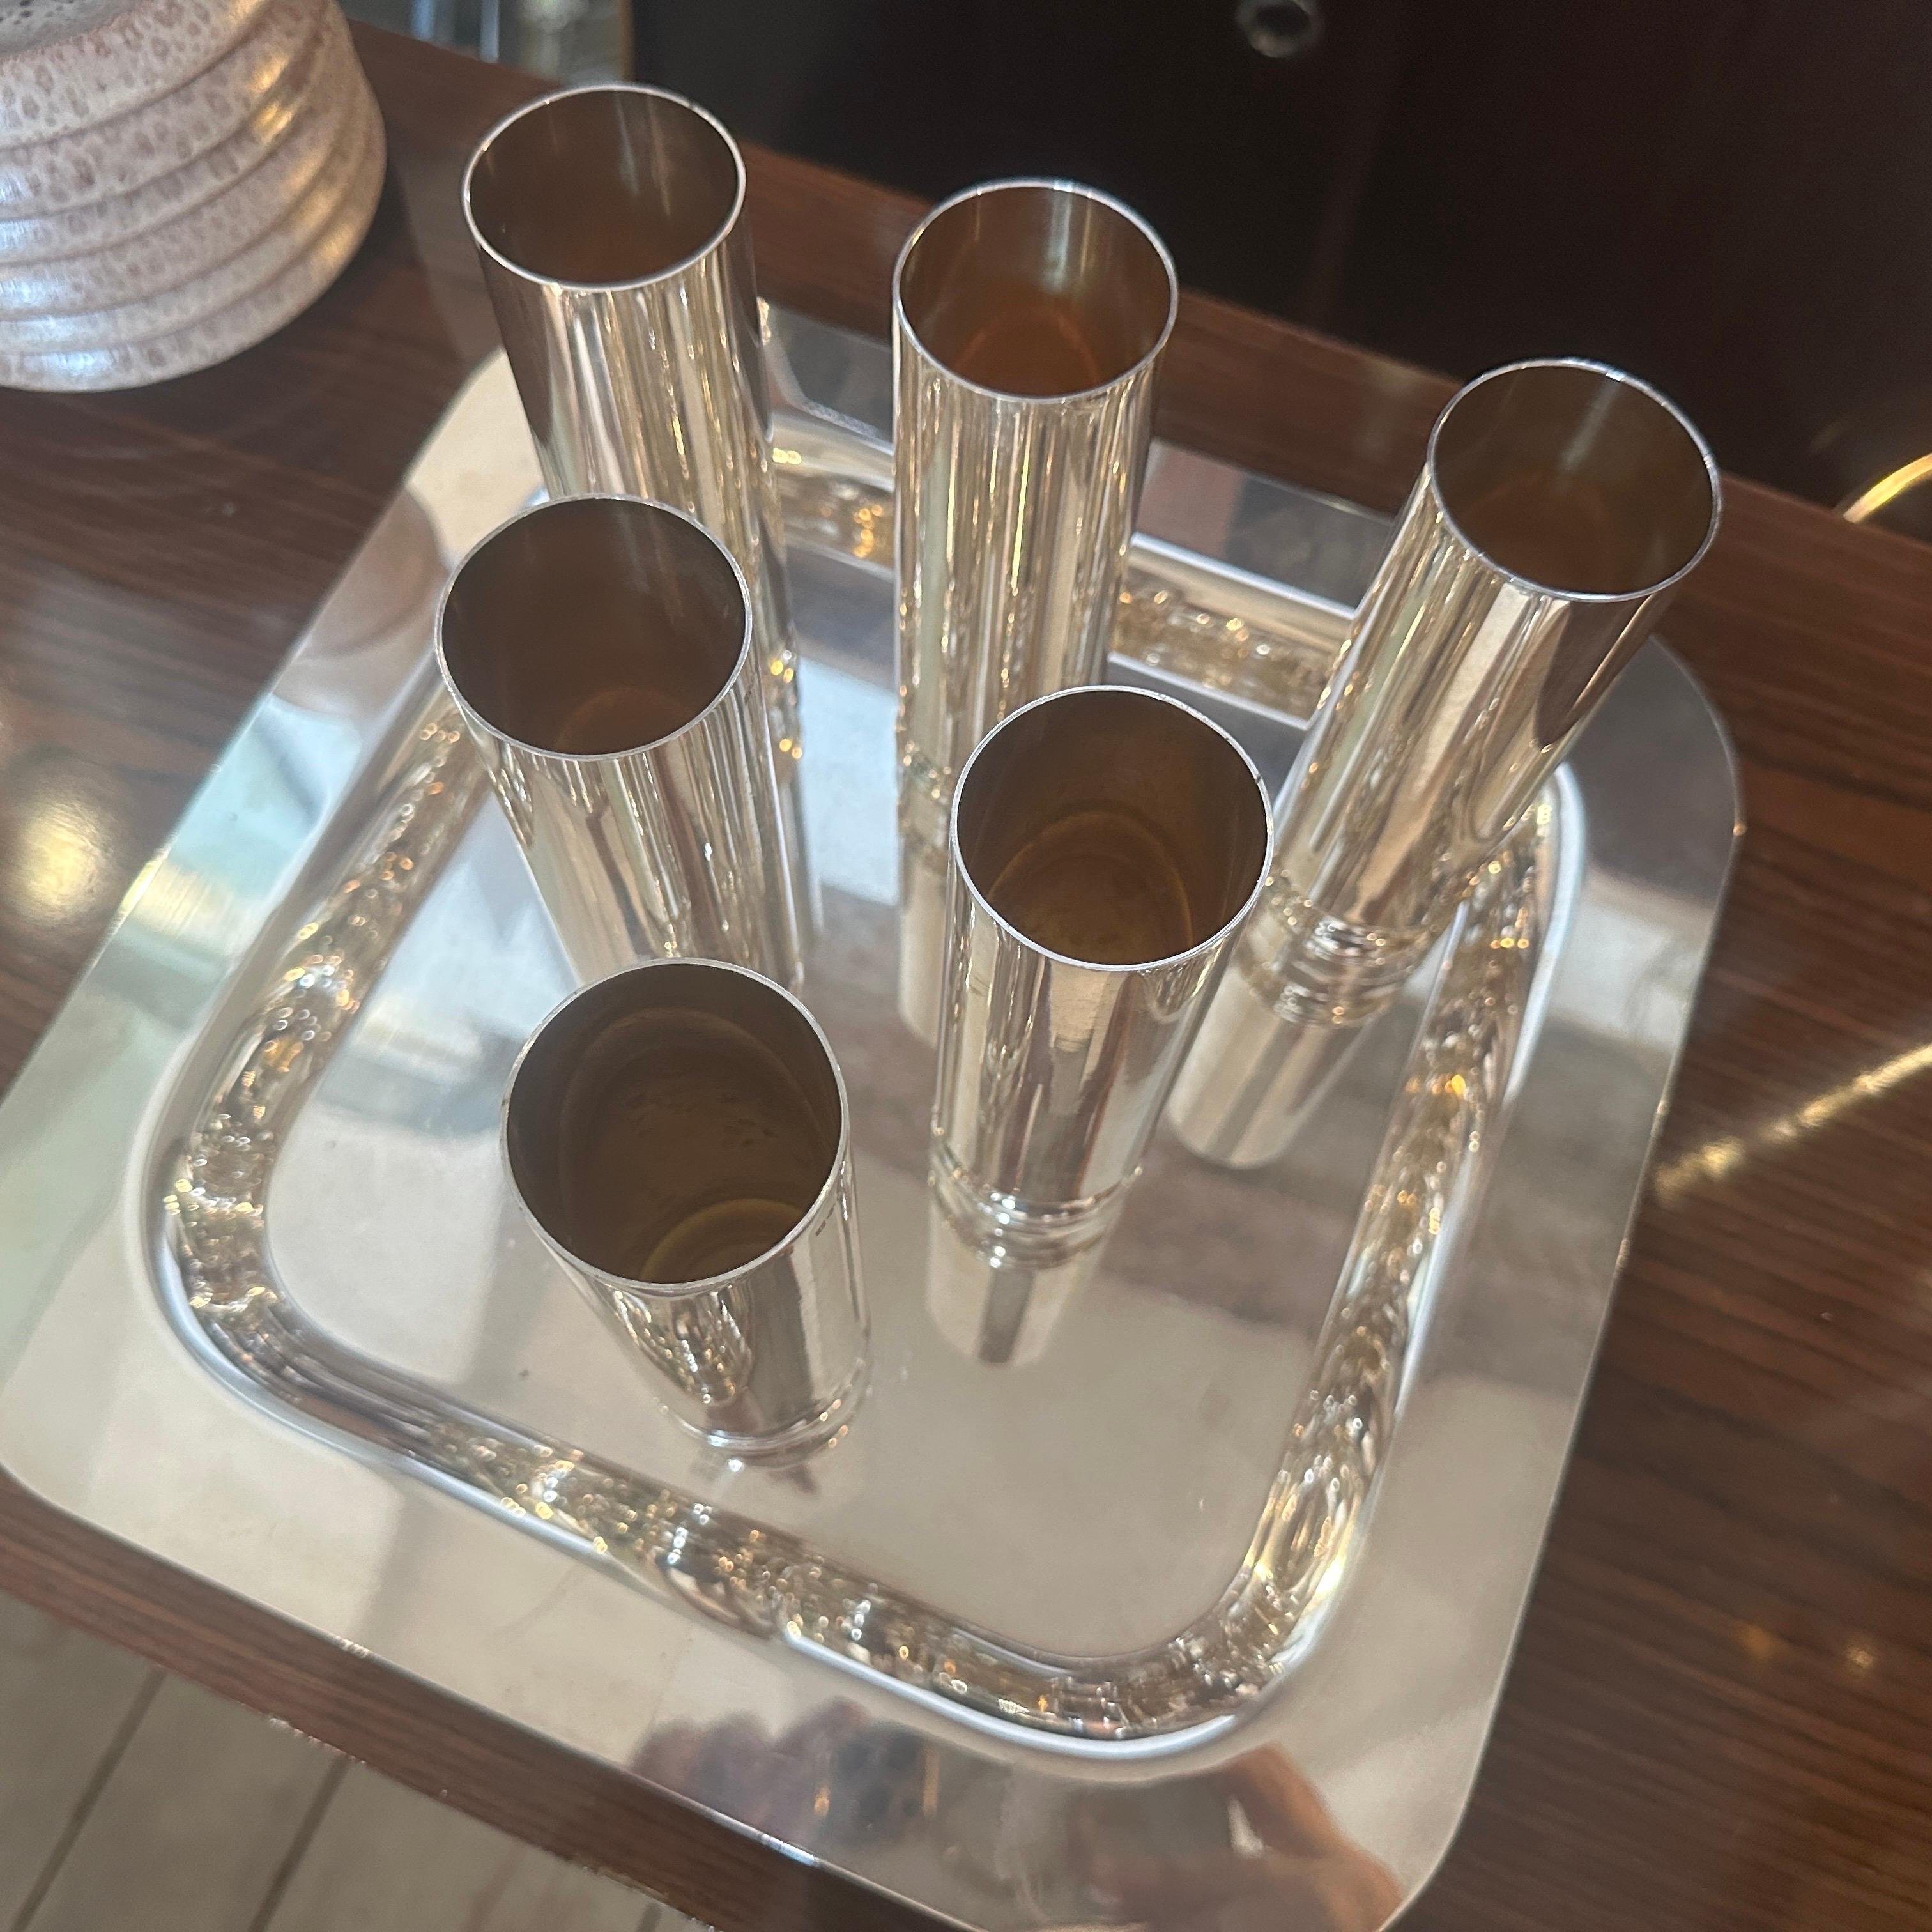 1980s Modernist Silver Plated Italian Square Tray and Champagne Flutes For Sale 1